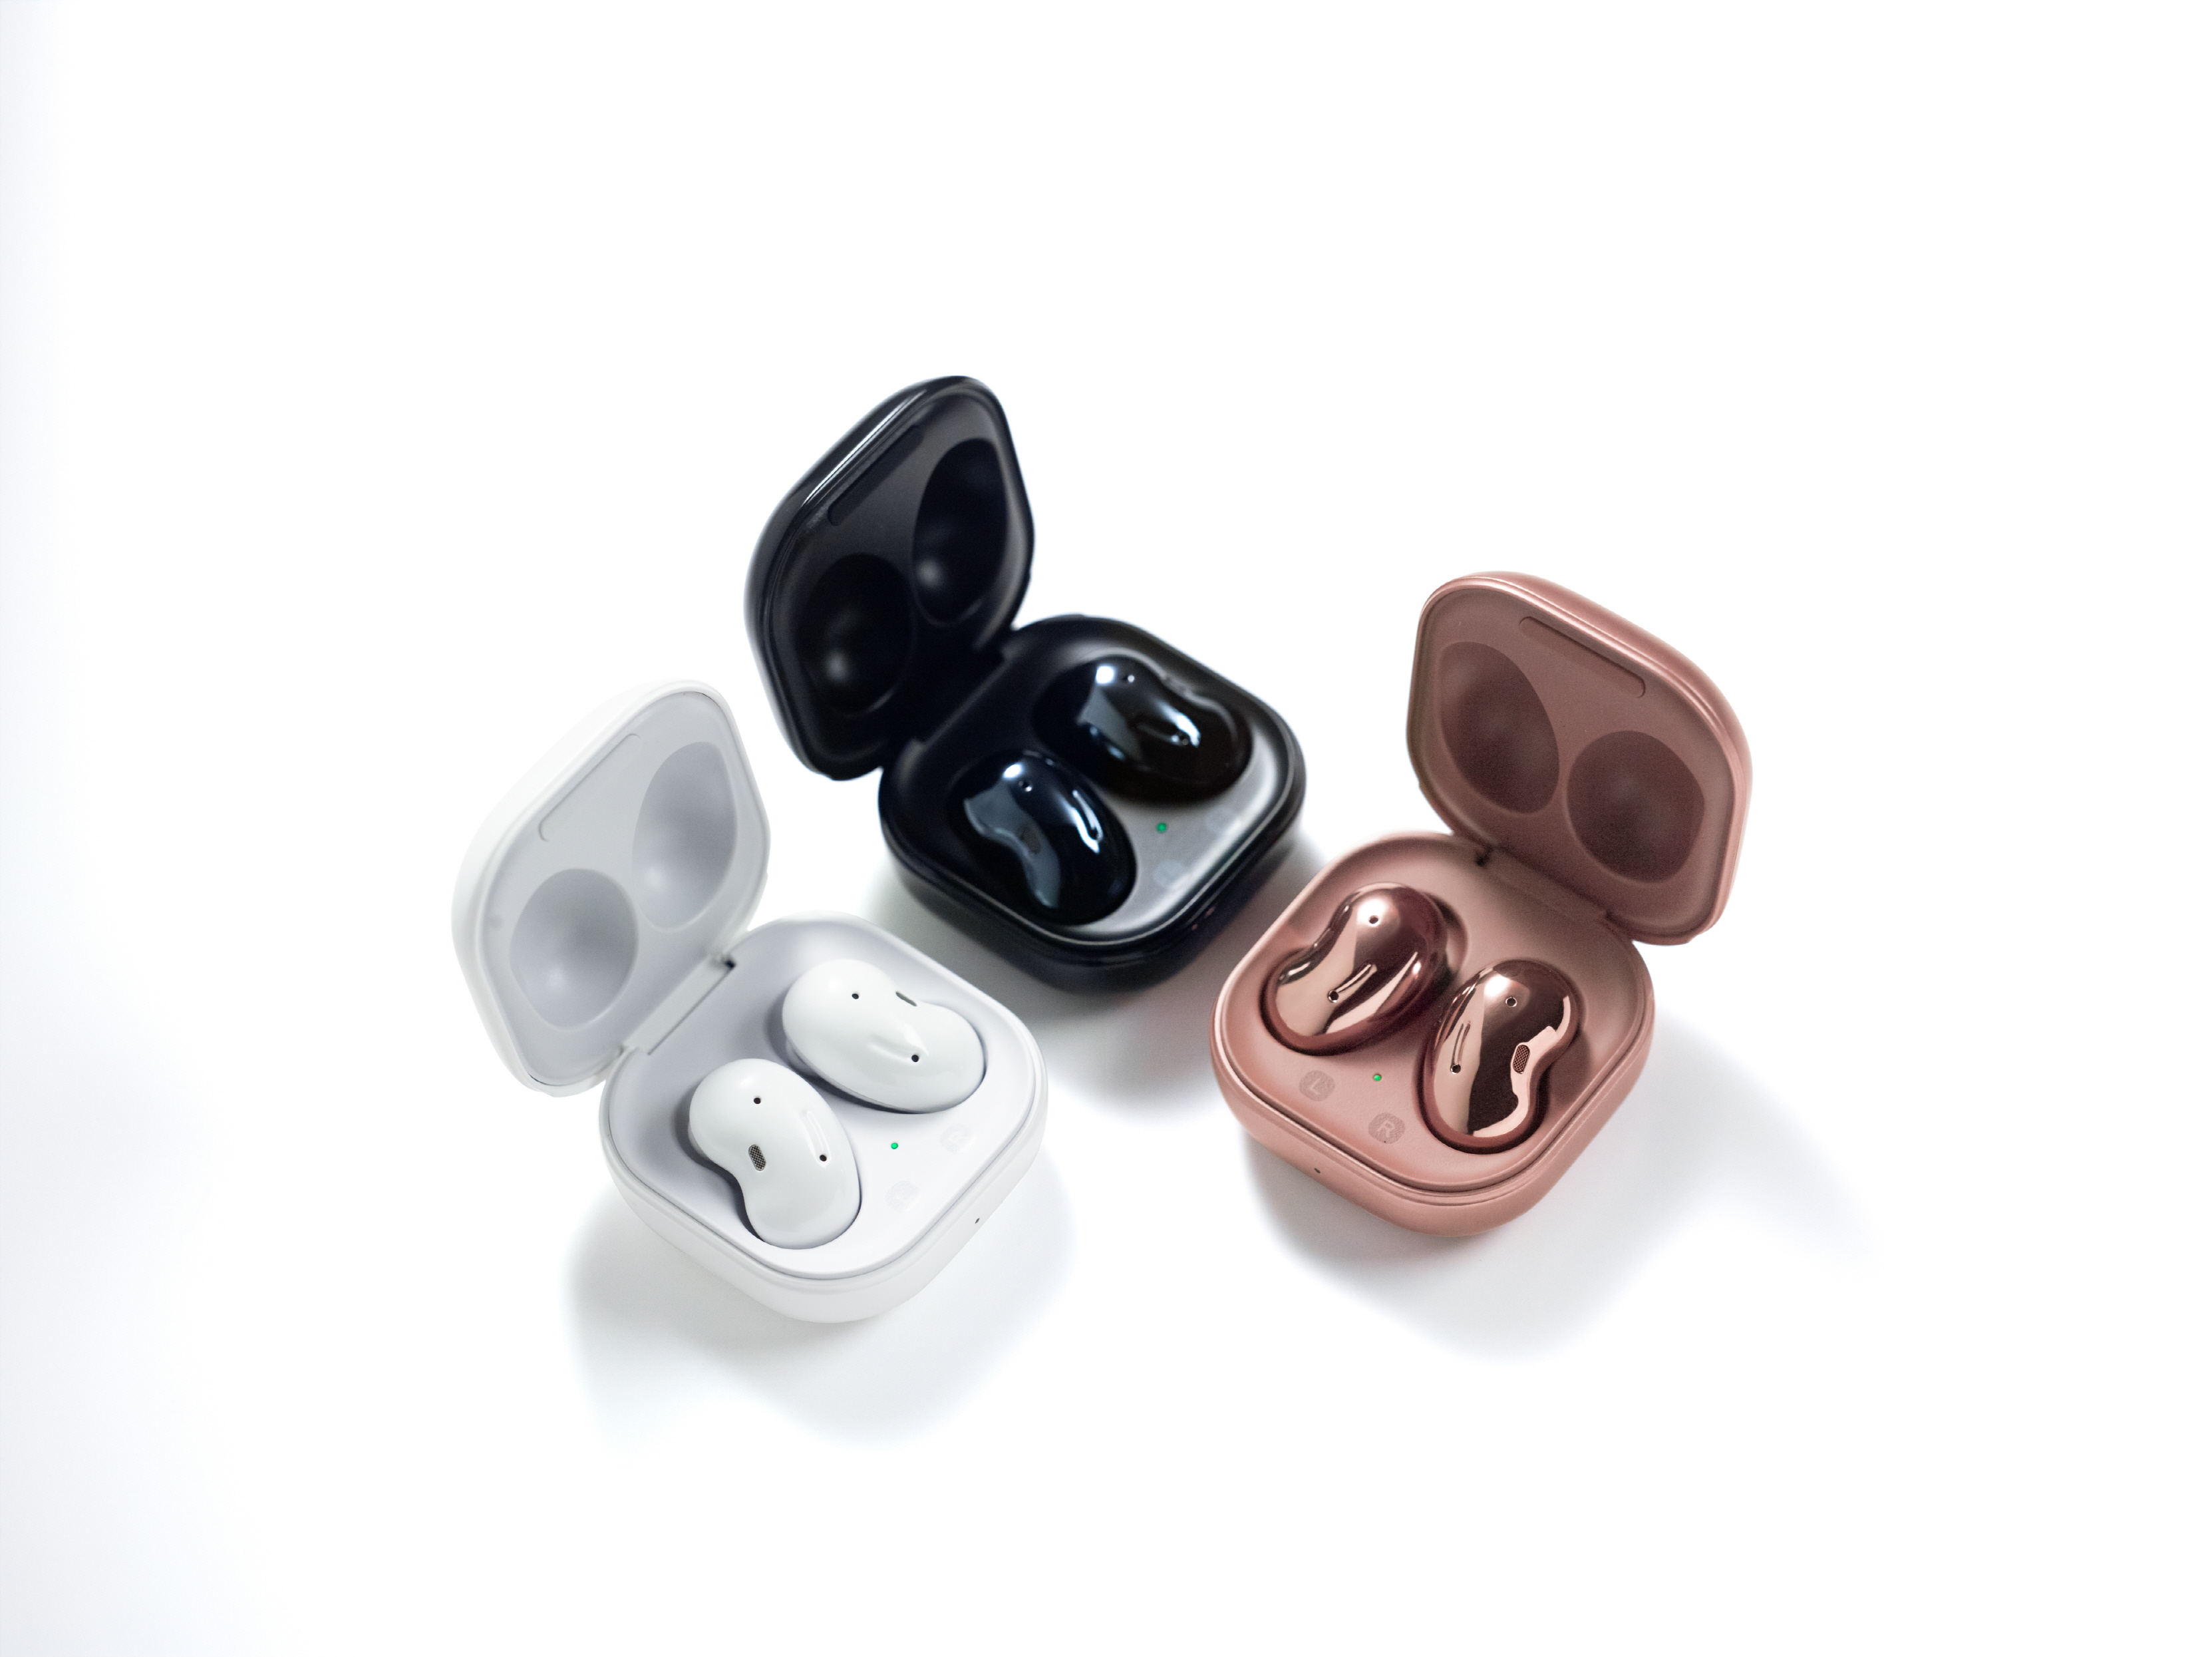 Galaxy Buds Live product image 7